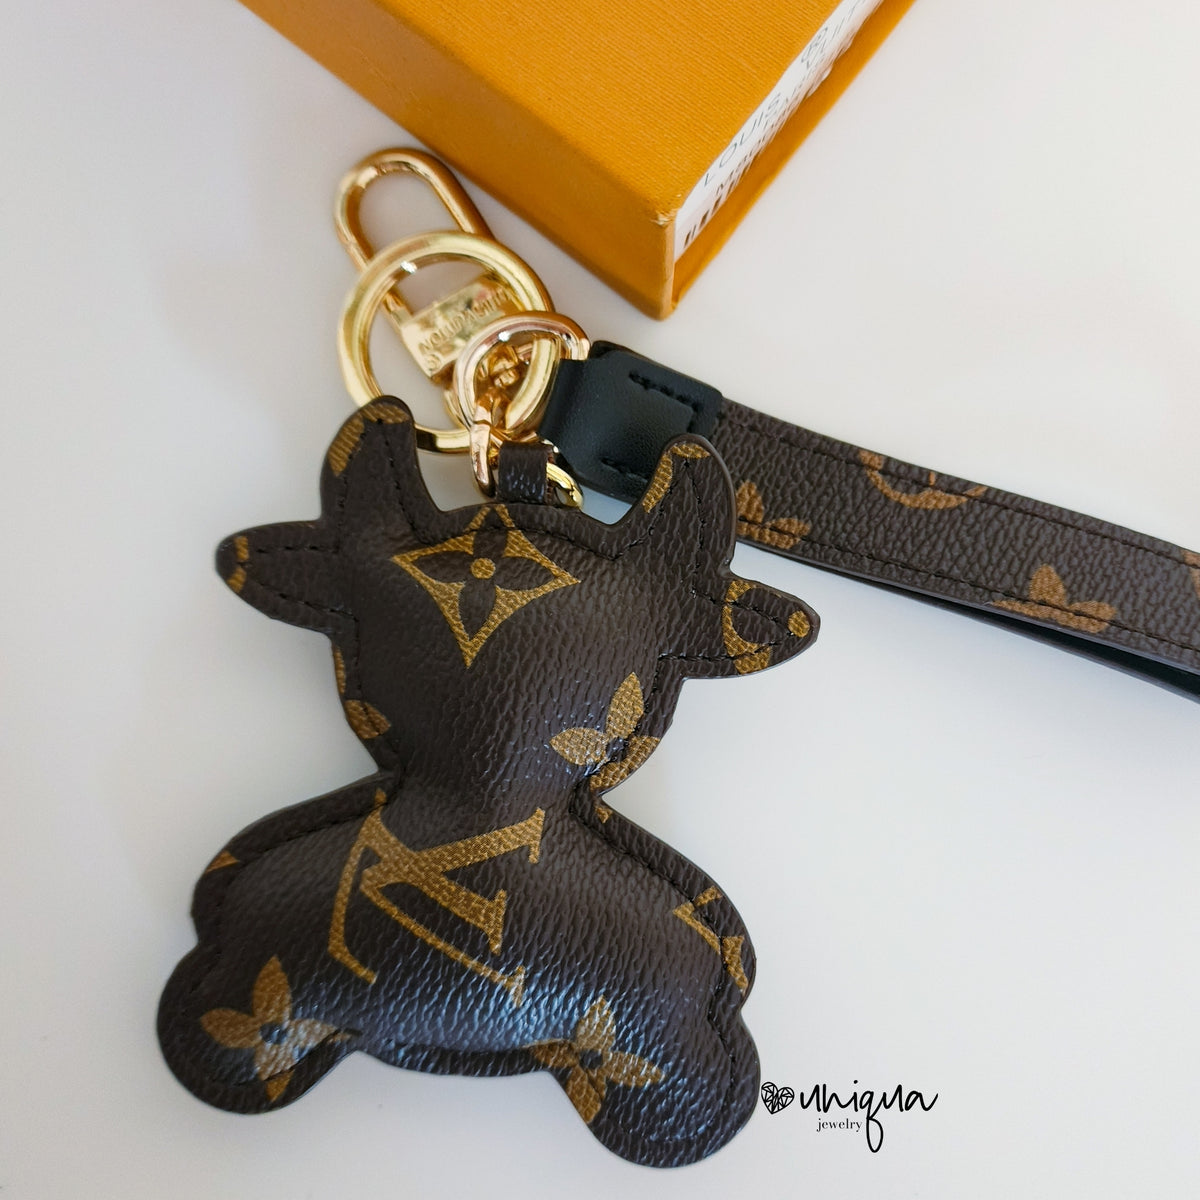 Leather Key Chain Charm - Year of the Snake Charm